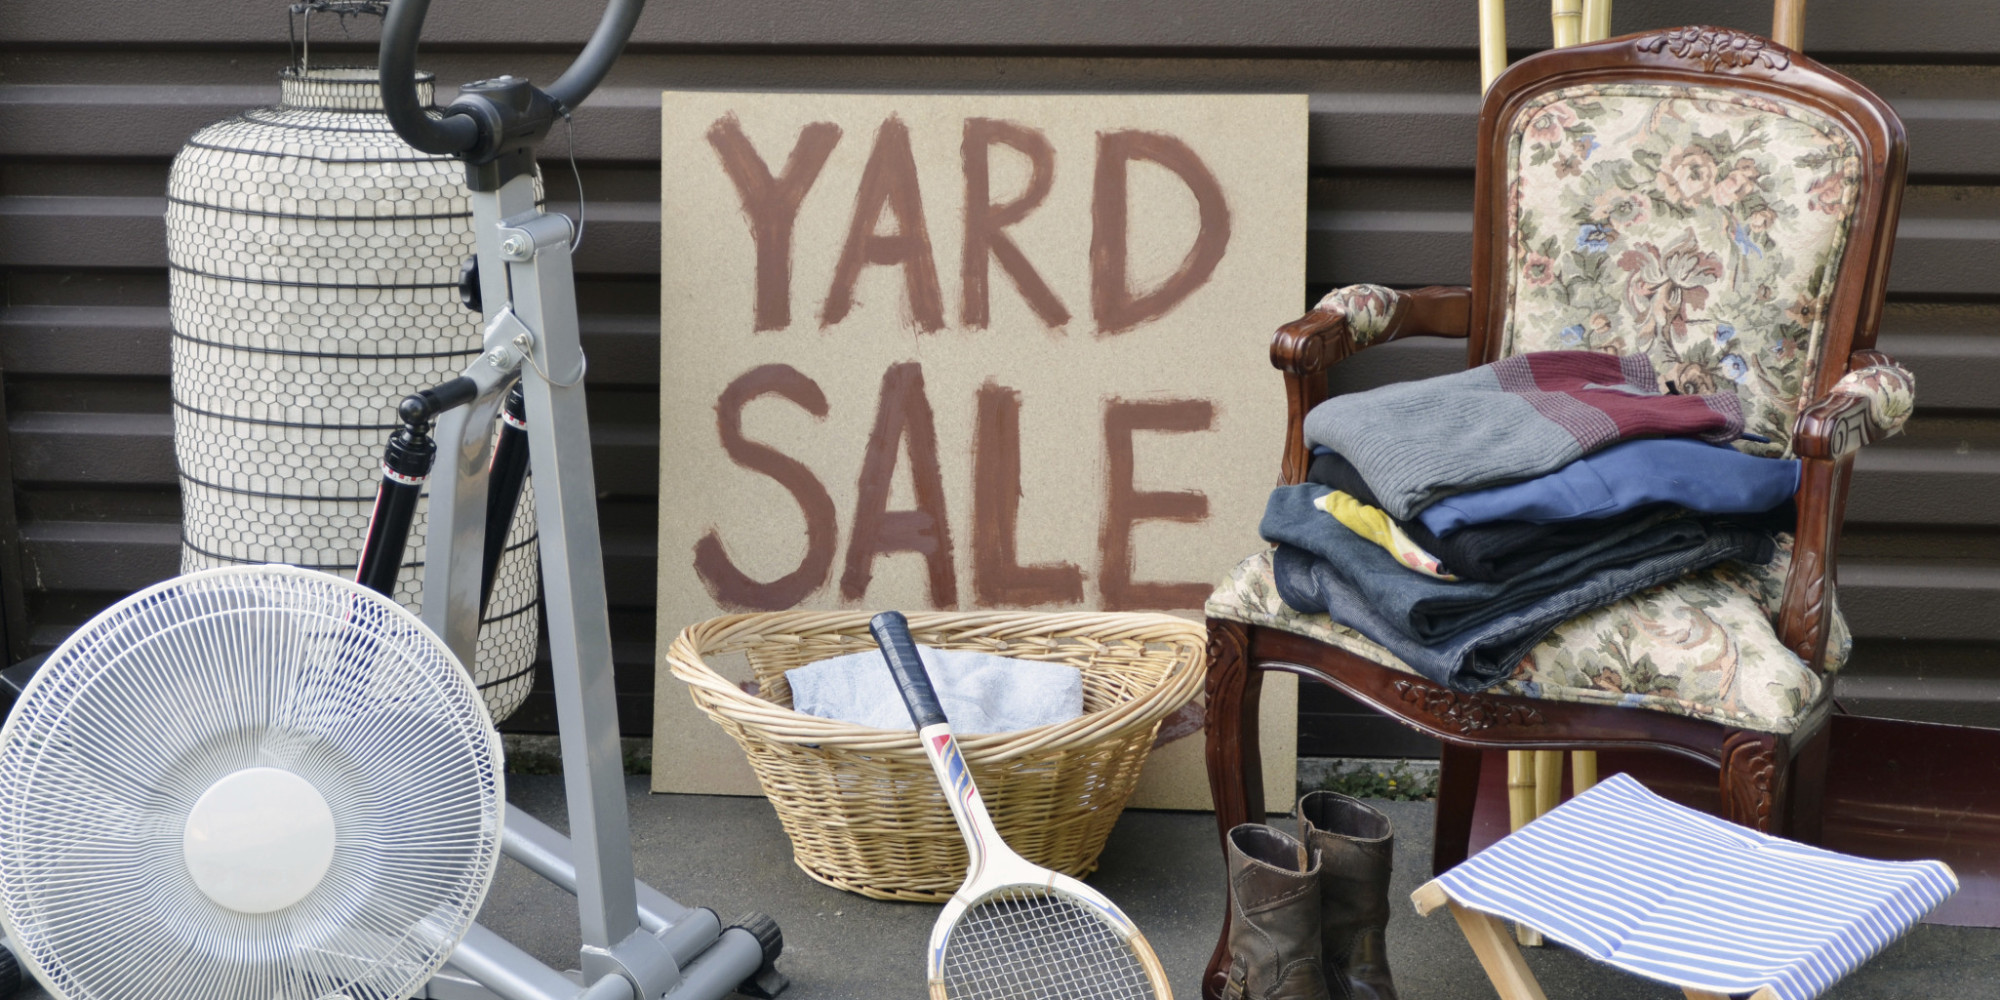 Top tips on how to sell your unwanted belongings | Student Blog UK | AFS